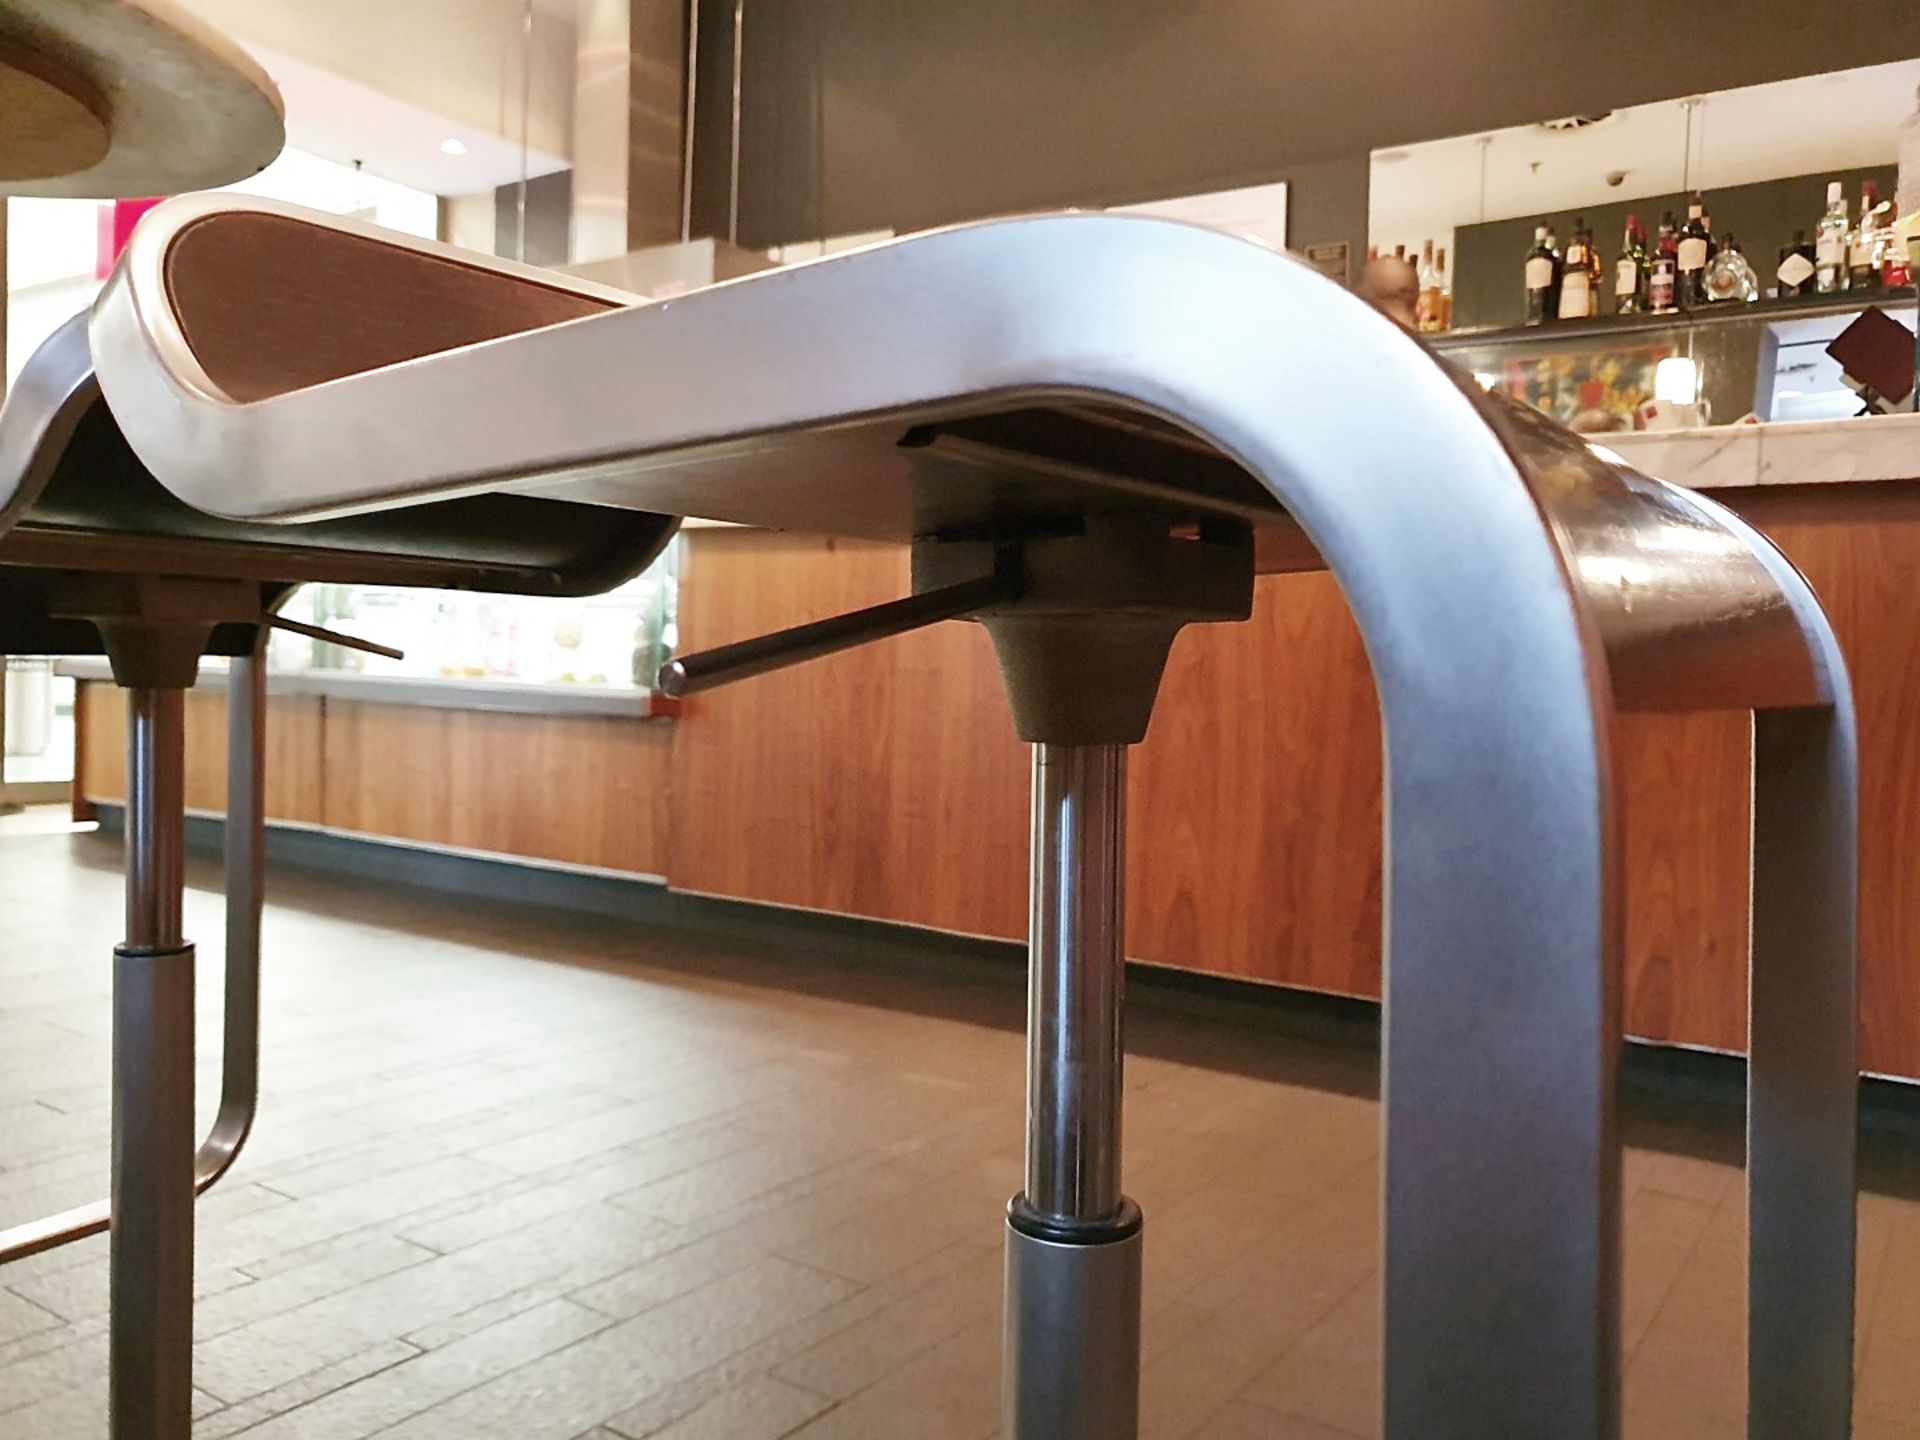 6 x Heavy Duty Commercial Bar Stools With Adjustable Hydraulic Aided Height - Dimensions: 35cm x - Image 3 of 7